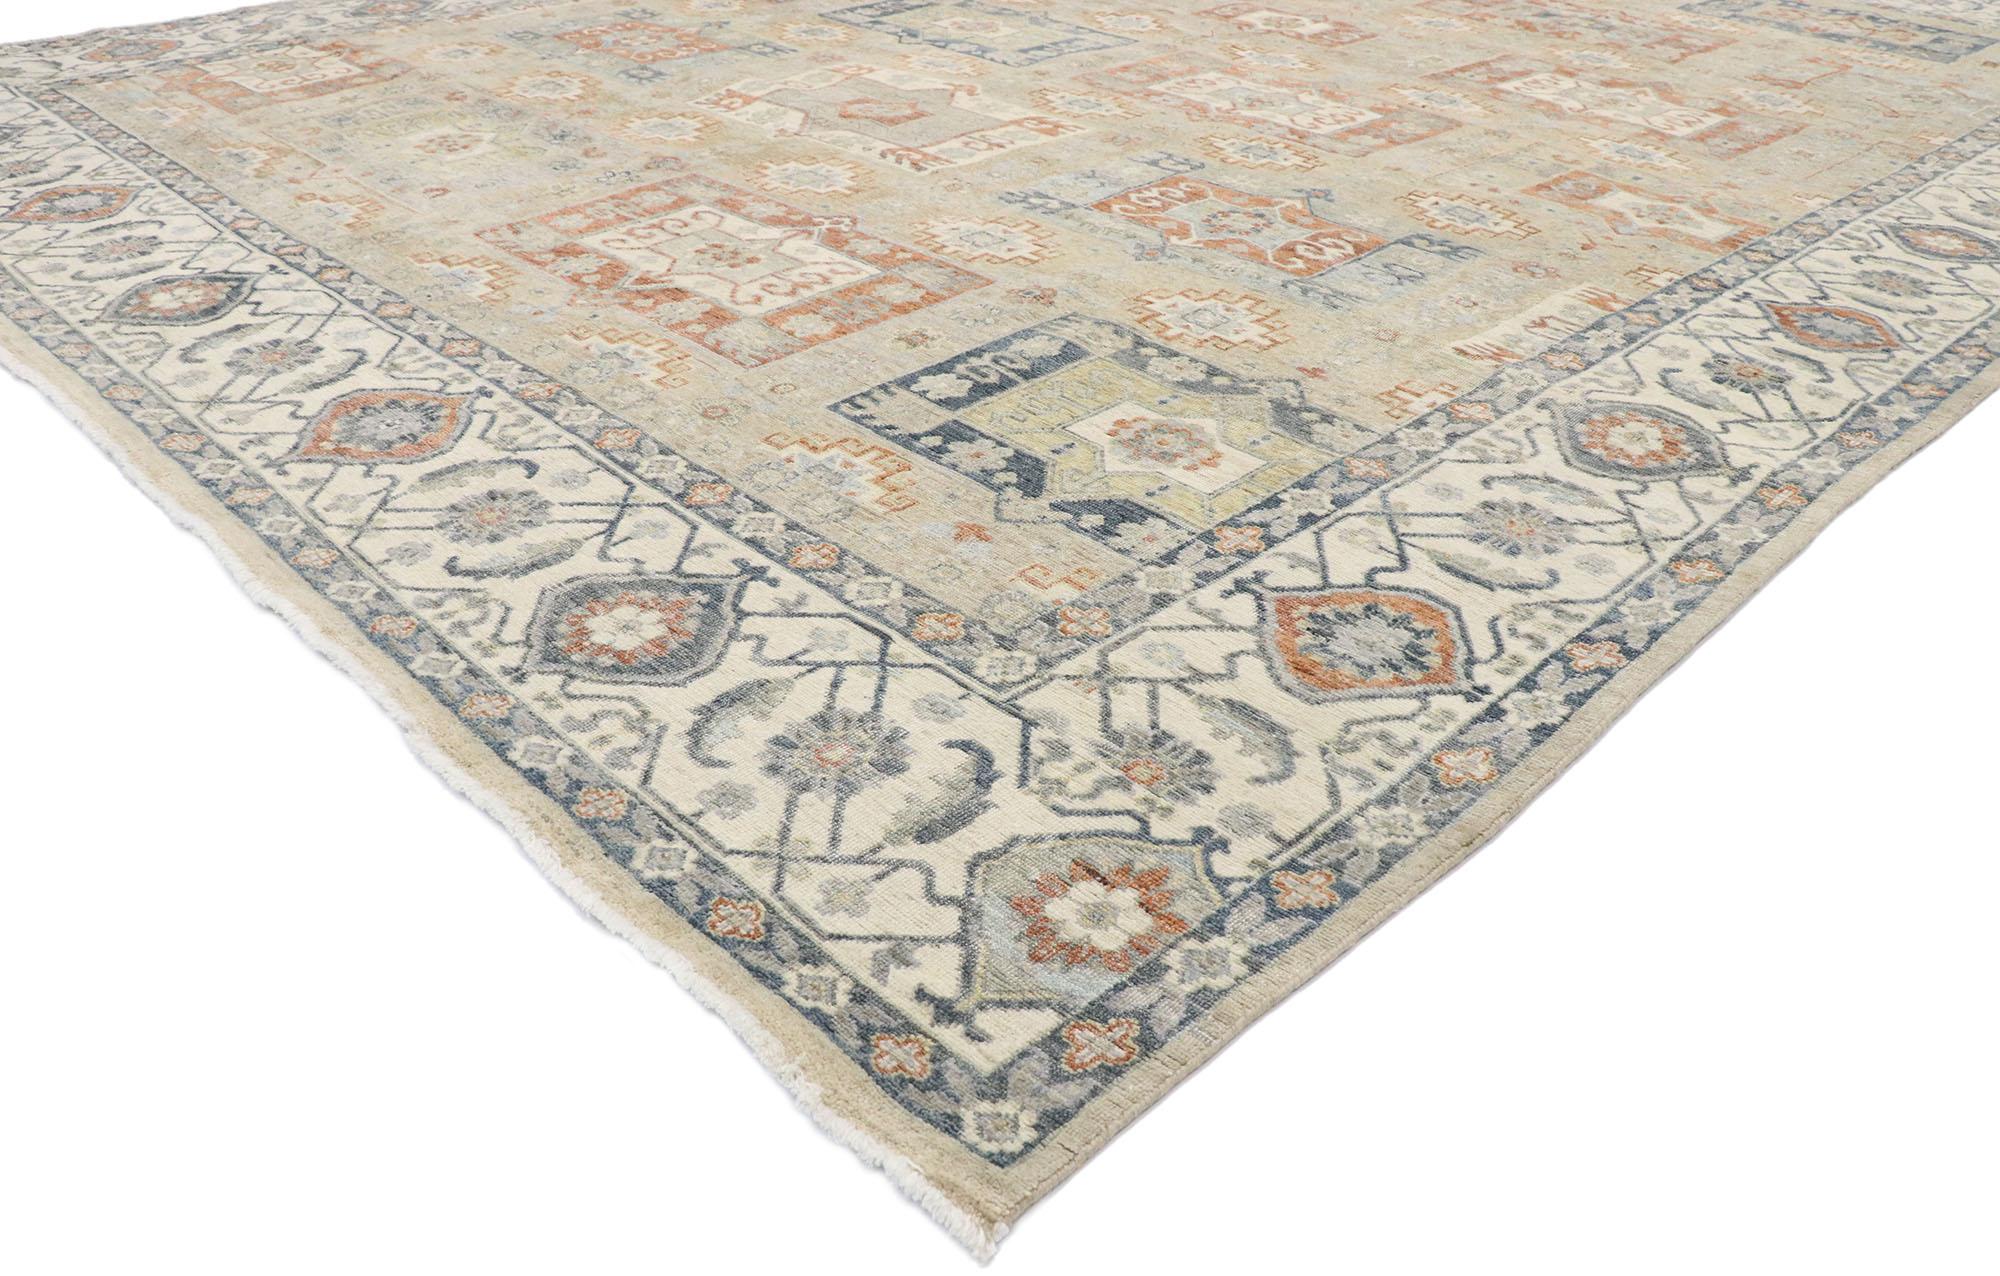 30630, new Contemporary Oushak style rug with Arts & Crafts style. This hand-knotted wool new contemporary Oushak-style rug features an all-over geometric pattern overlaid upon an abrashed neutral field. The attractive design is comprised of offset